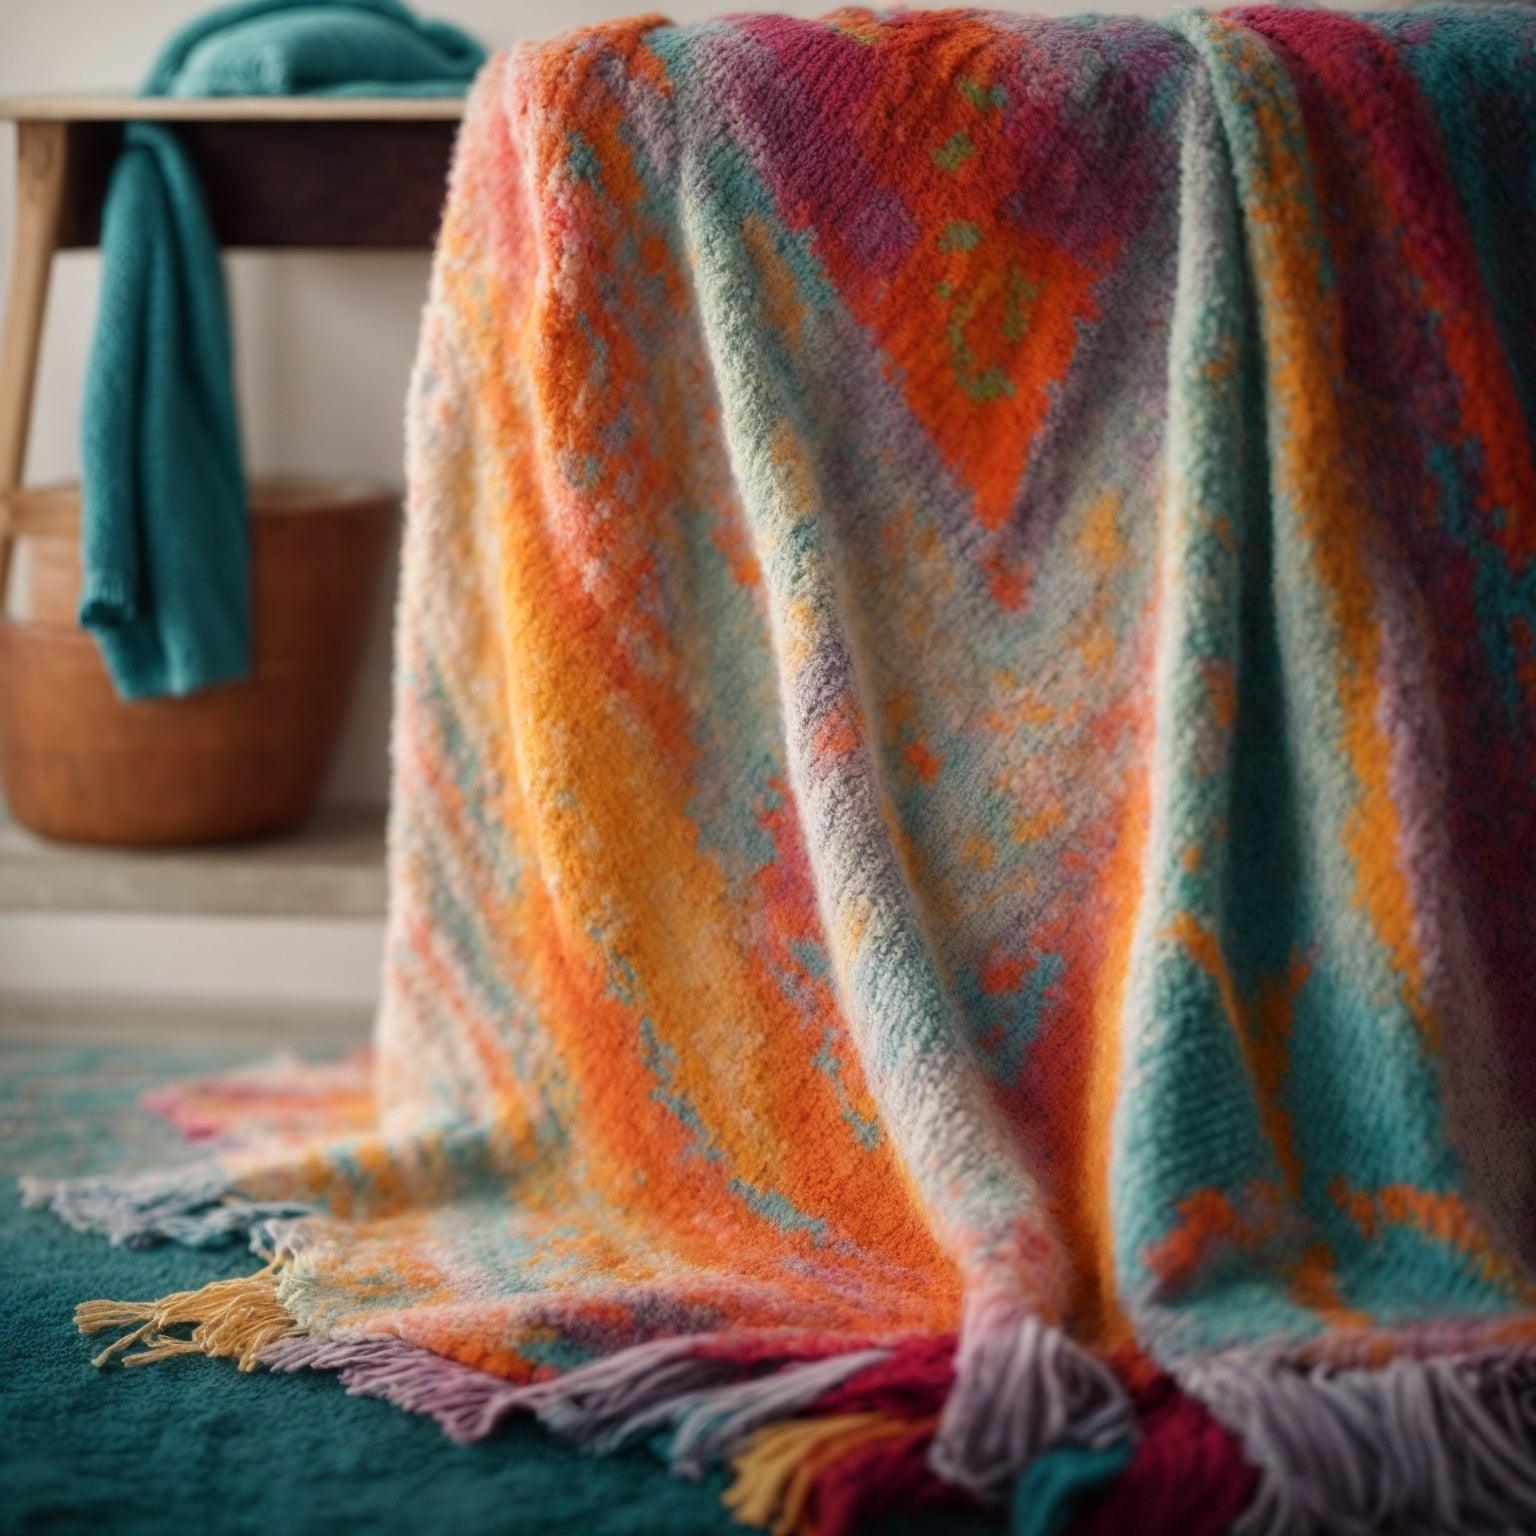 How to Wash and Dry a Knitted Blanket SanHom